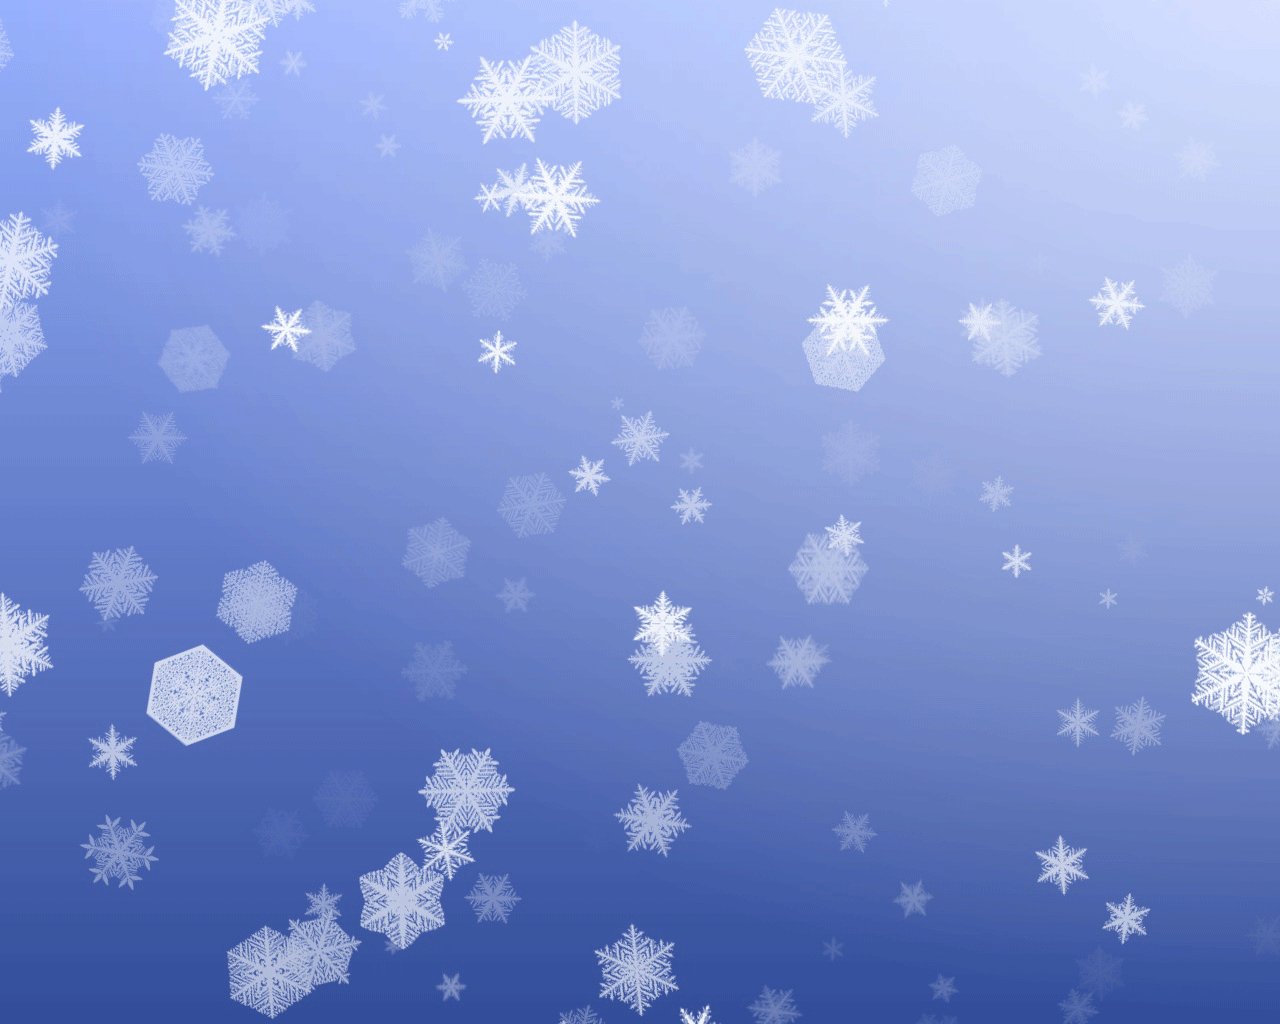 Cool Winter Backgrounds - Wallpaper Cave